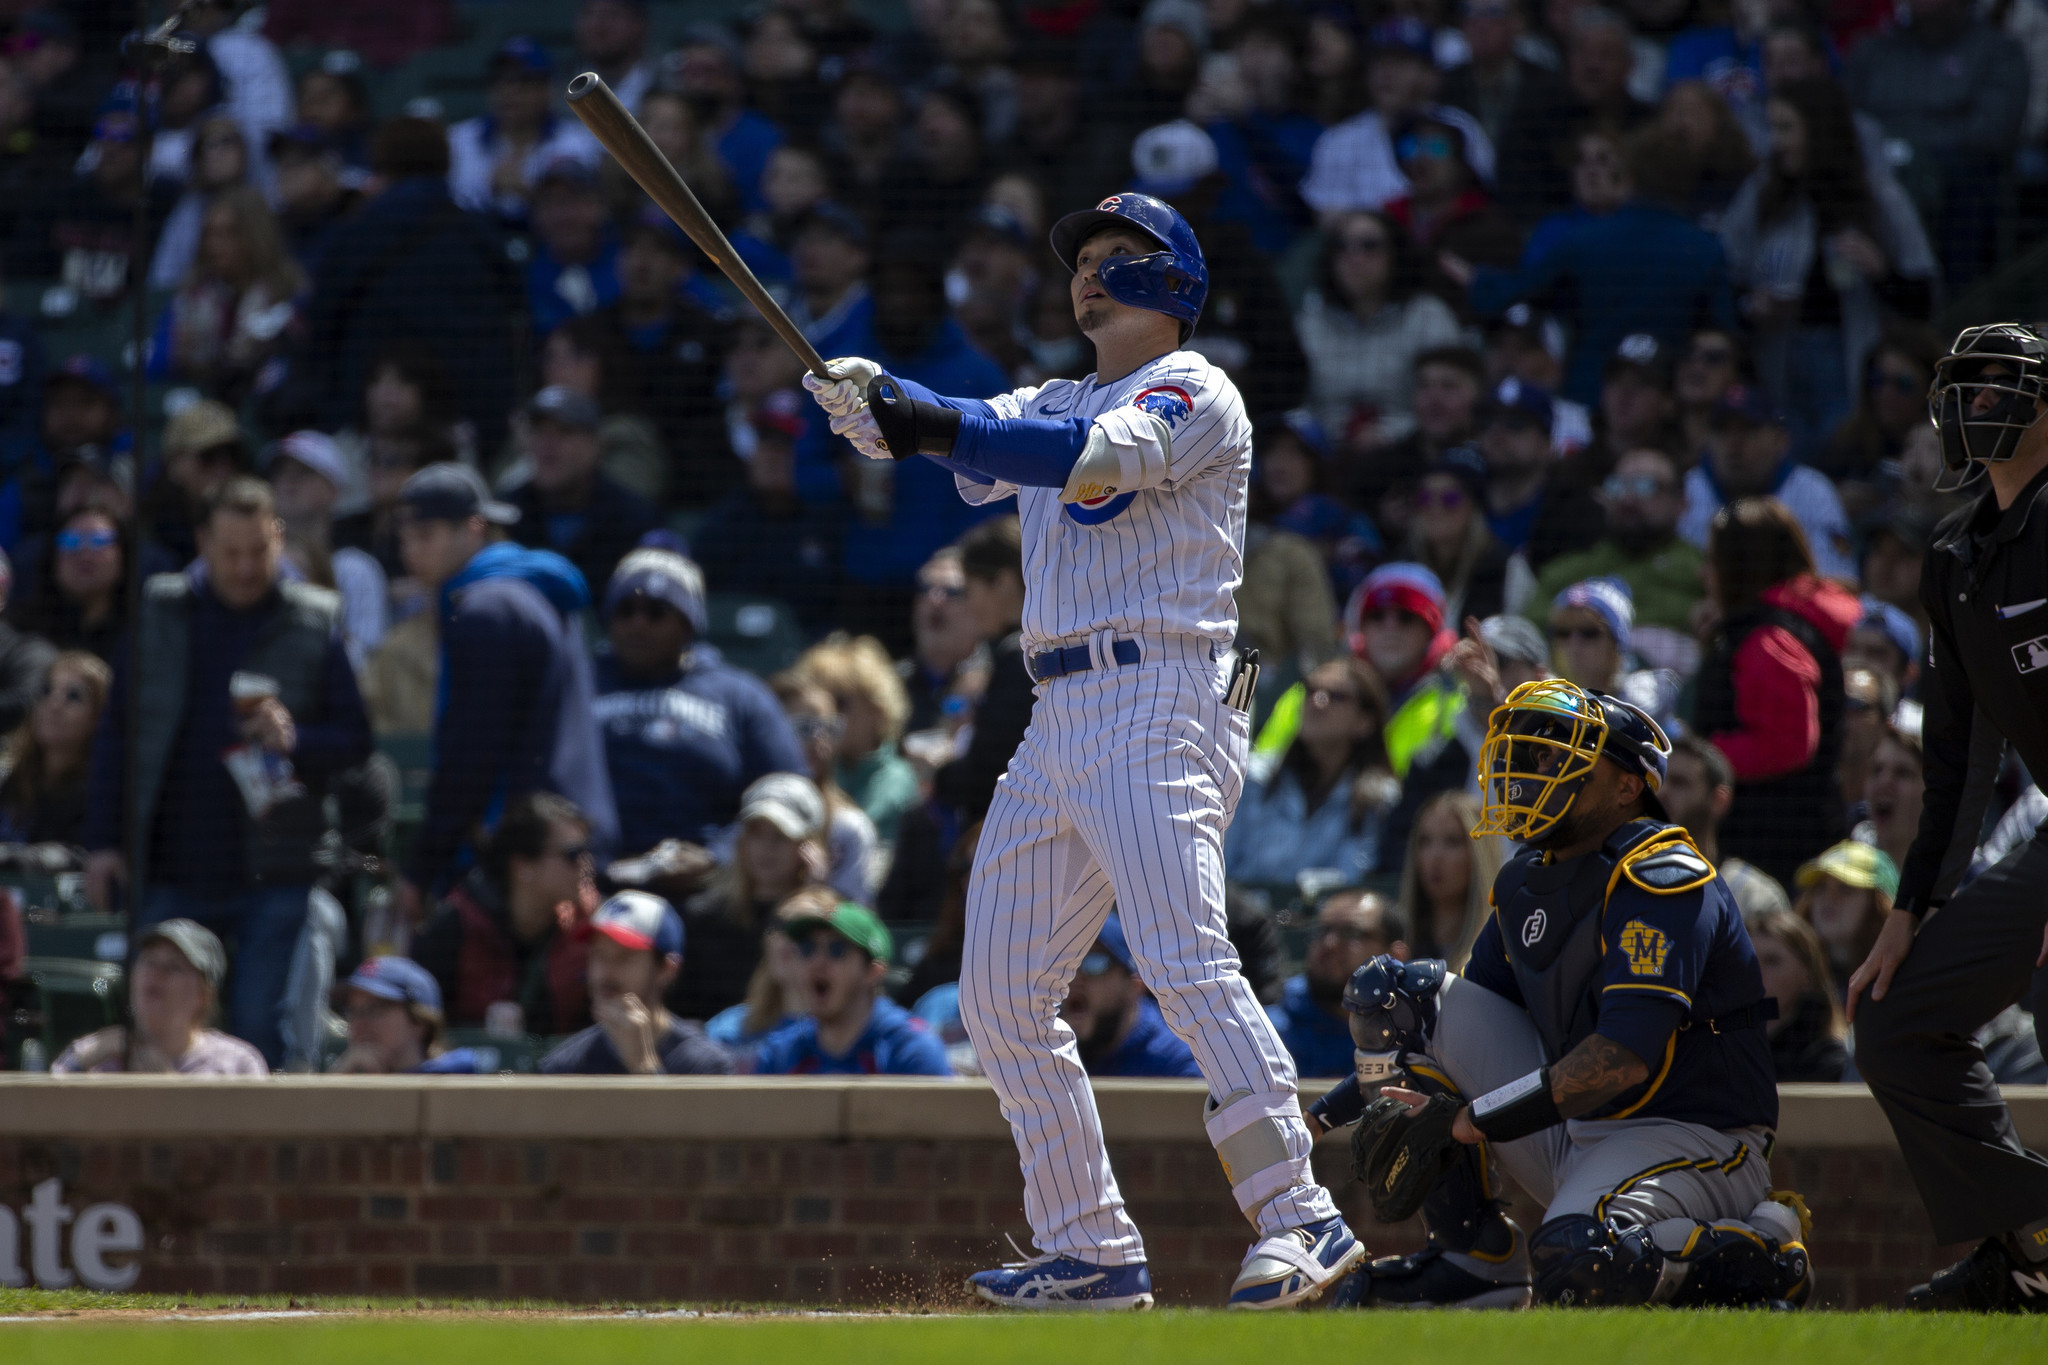 Chicago Cubs: At 43, Kosuke Fukudome is still playing in Japan